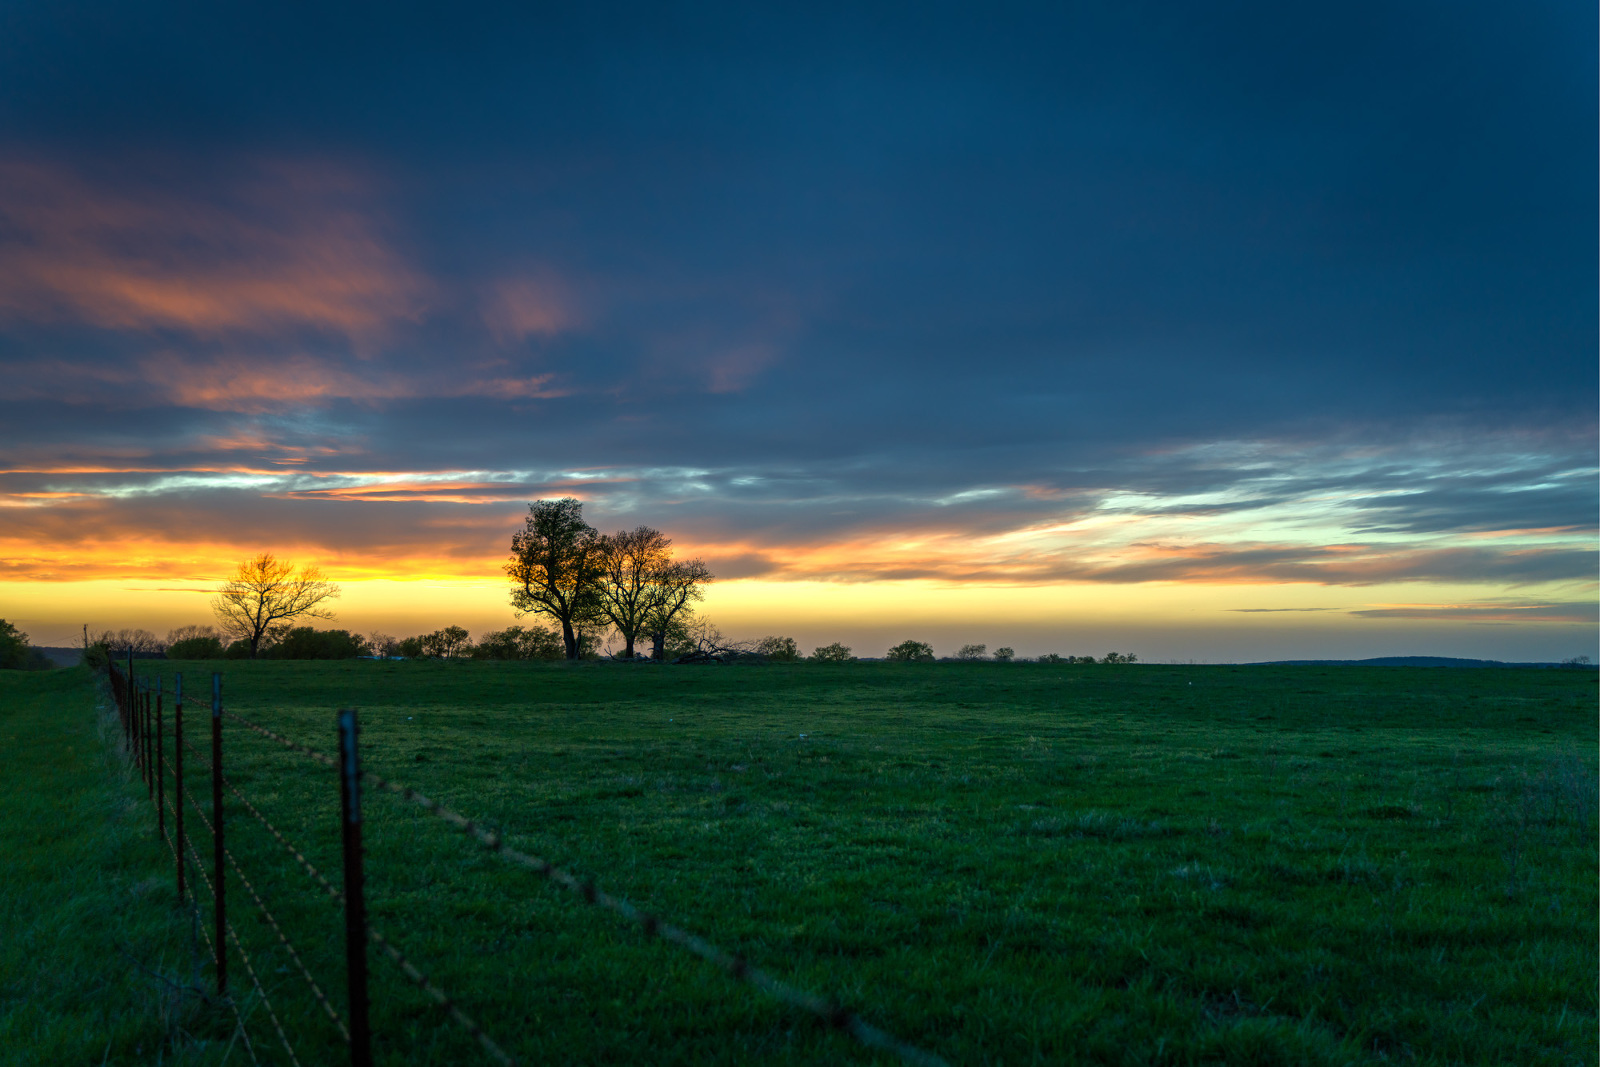 HDR, Landscape, oklahoma, outdoor, sunset